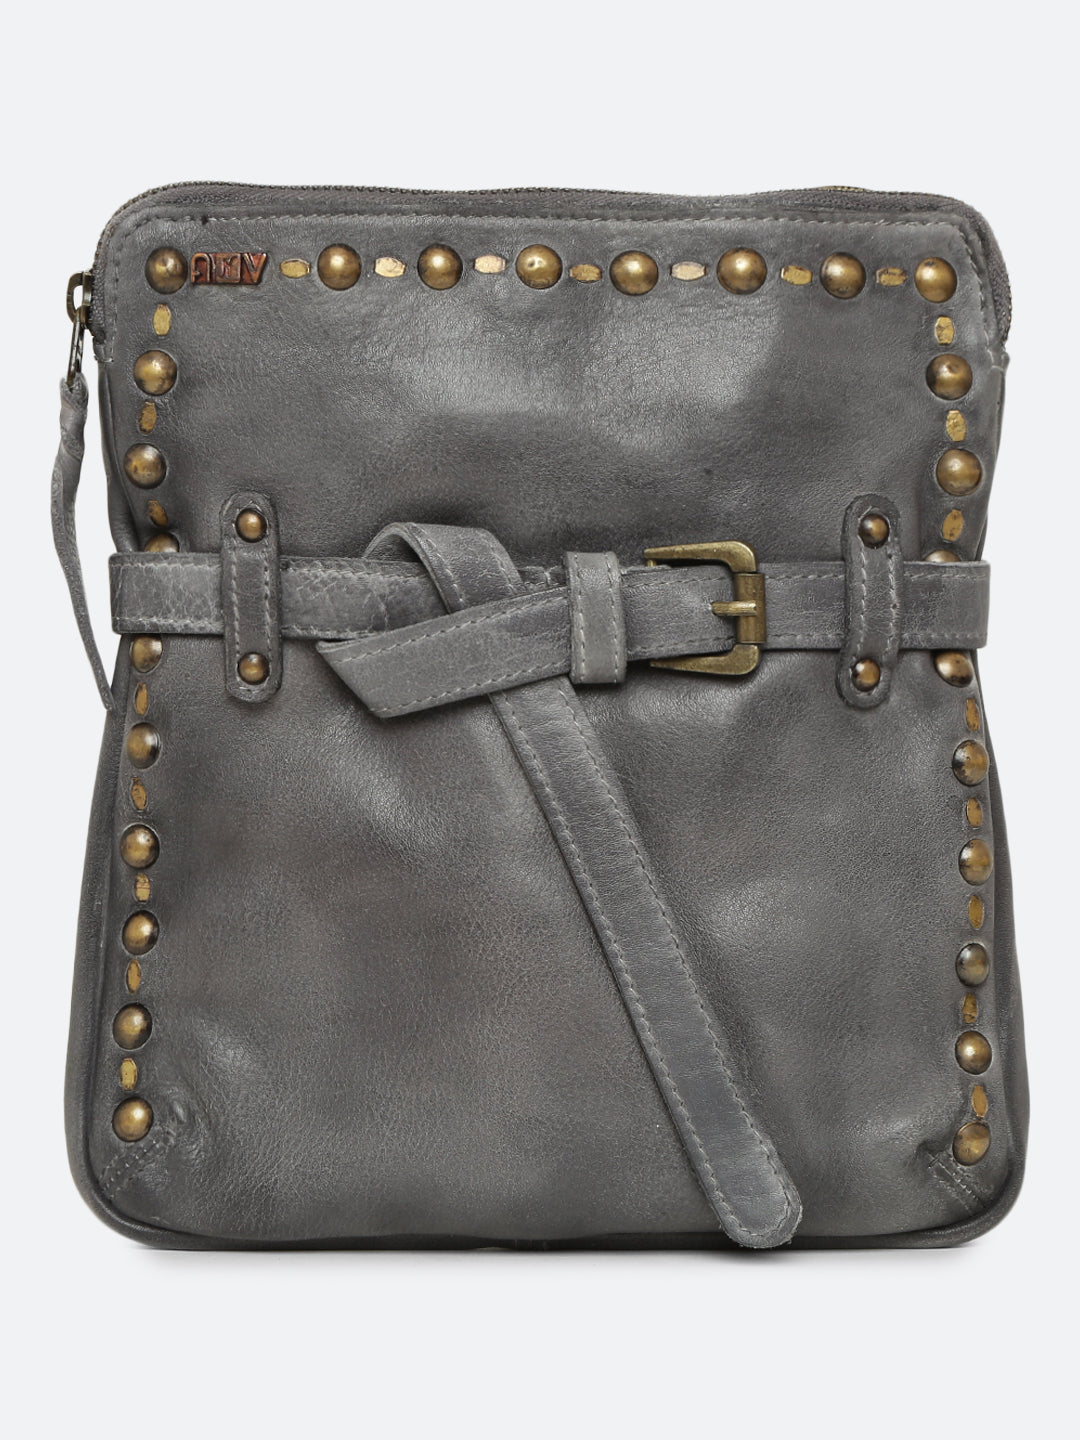 Ivory: Grey Leather Studded Buckled Cross Body